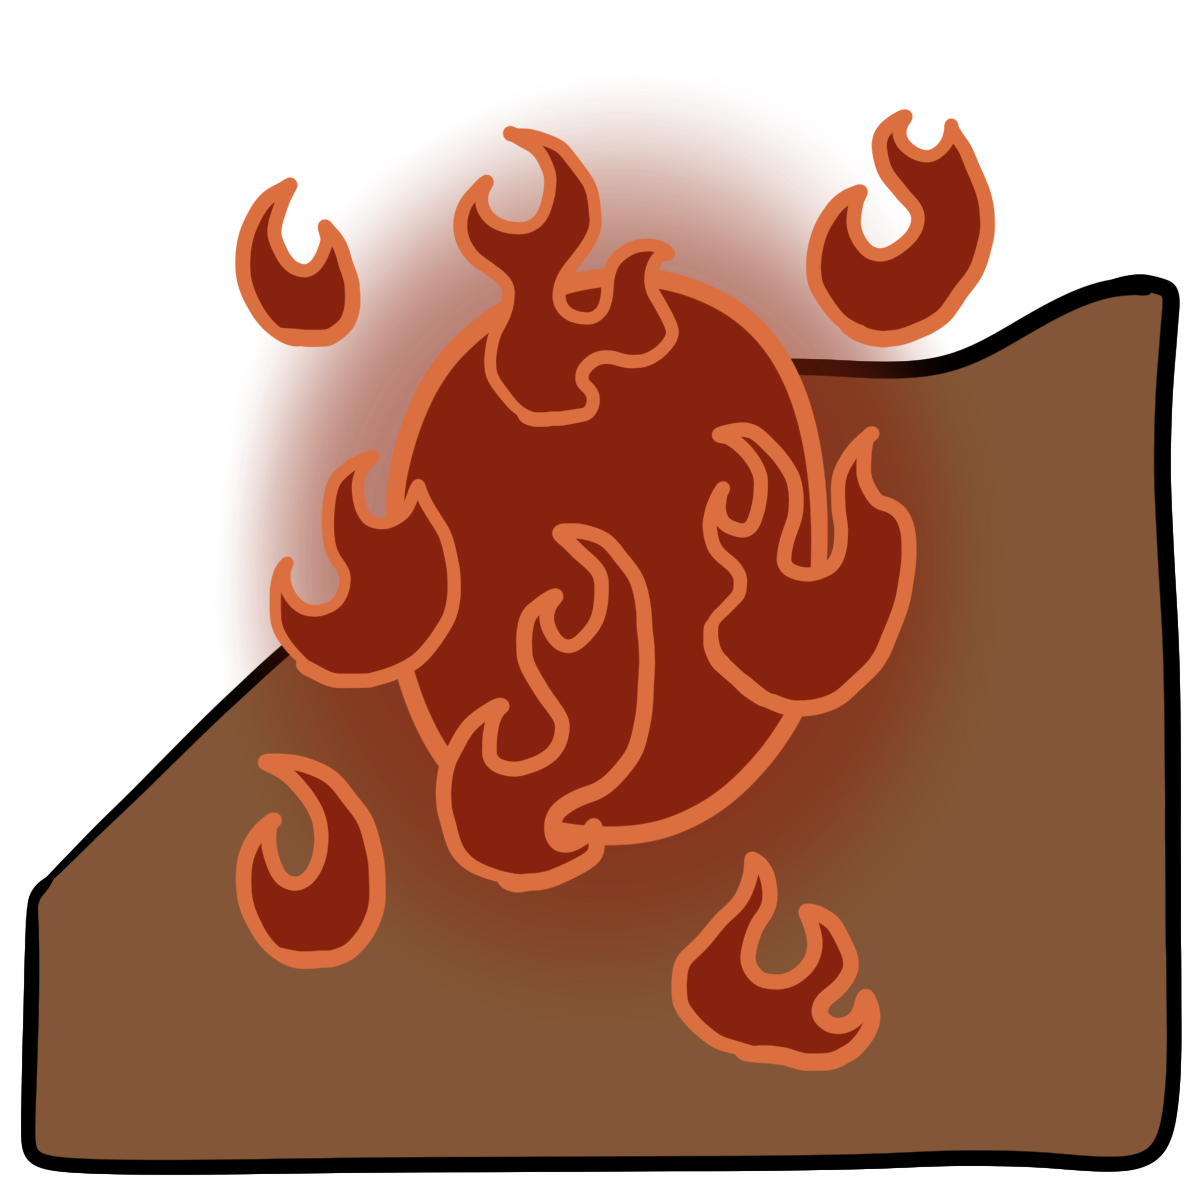 Orange-red oval with flames around it. Curved medium brown skin fills the bottom half of the background.